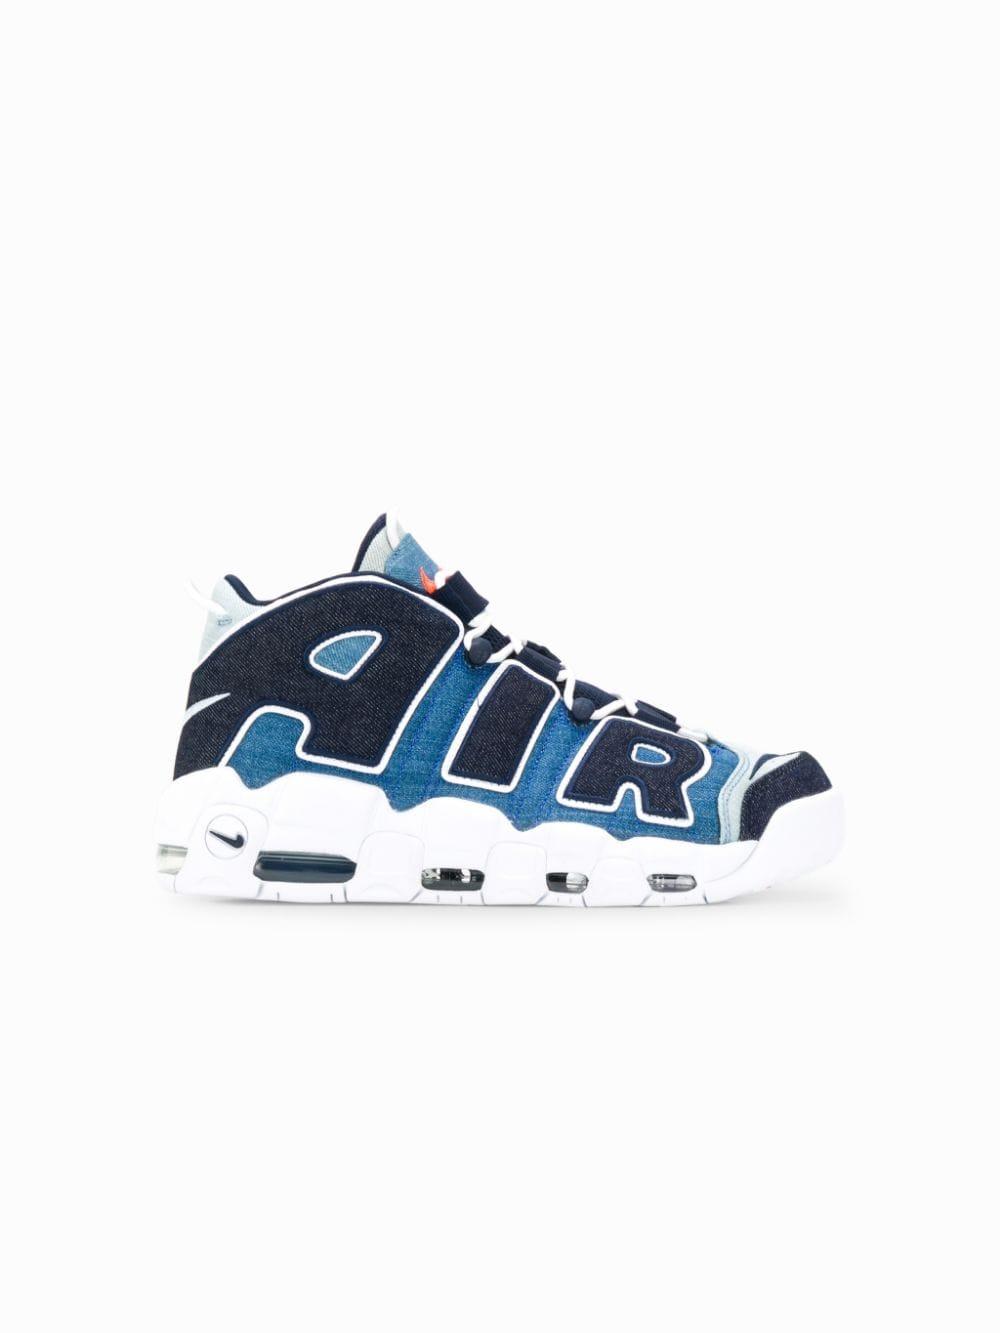 Nike Air More Uptempo '96 Qs Denim Sneakers in Blue for Men - Lyst